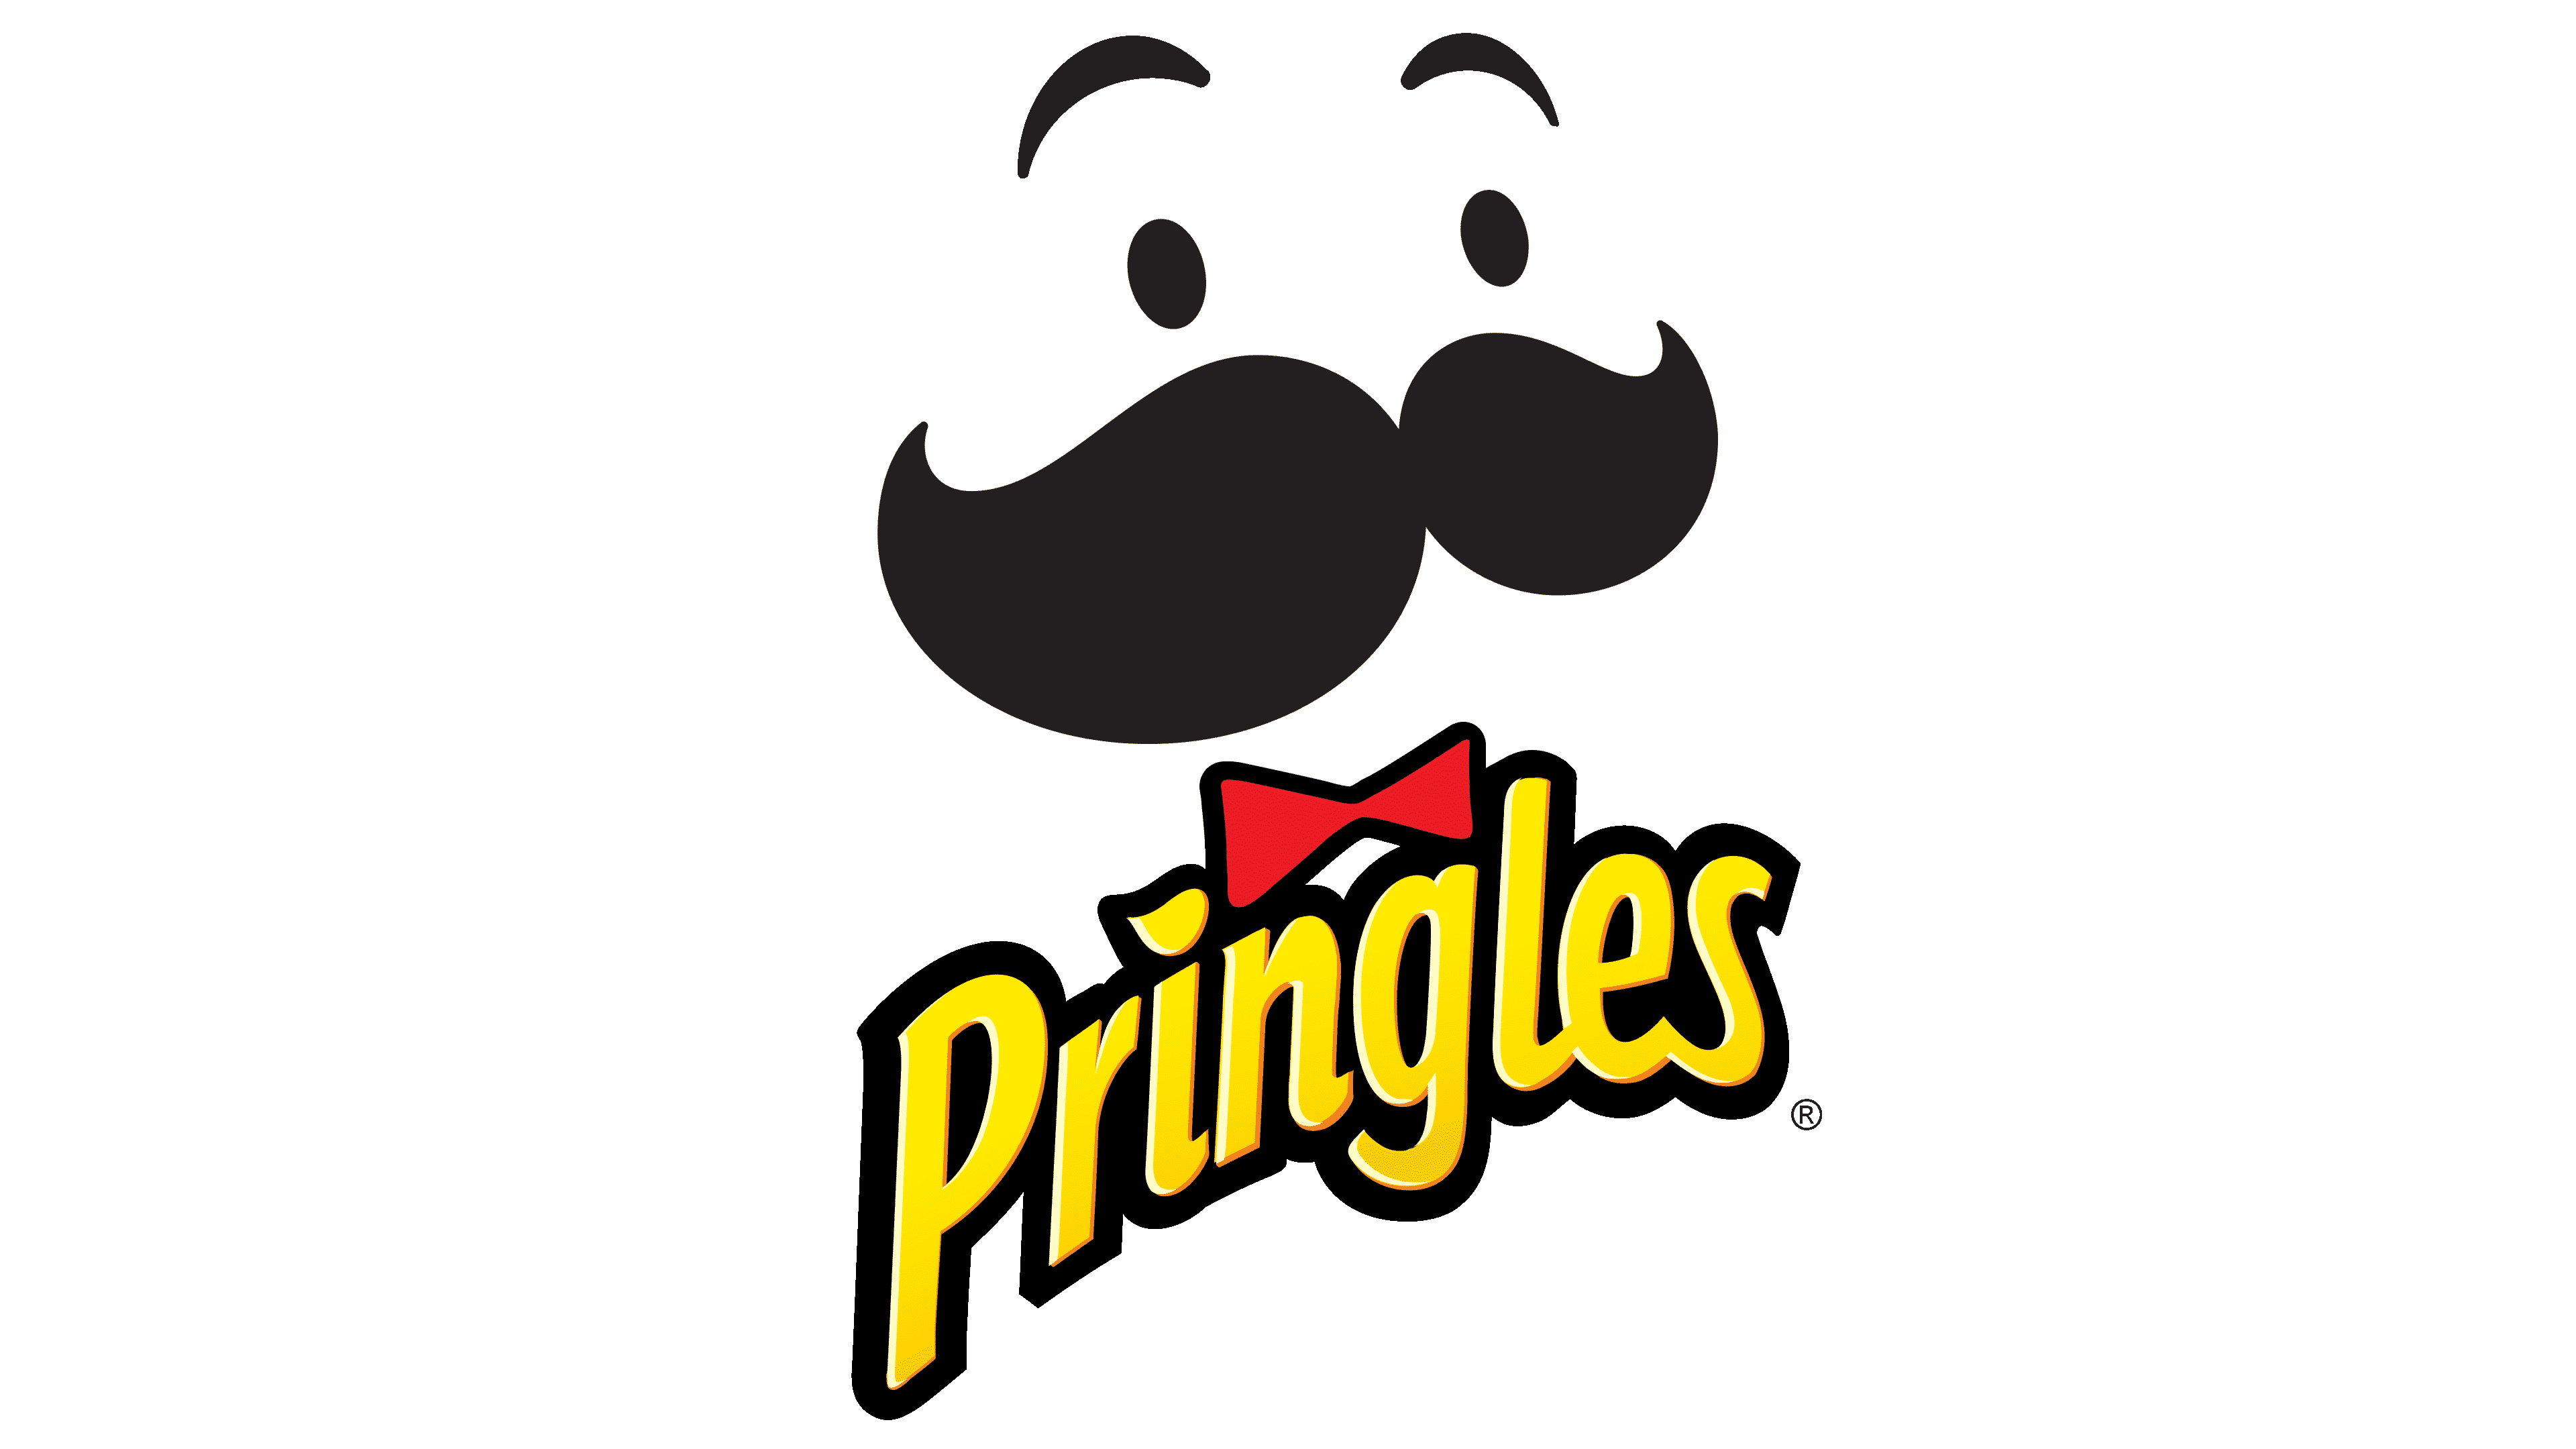 Pringles change their logo for the first time in 10 years